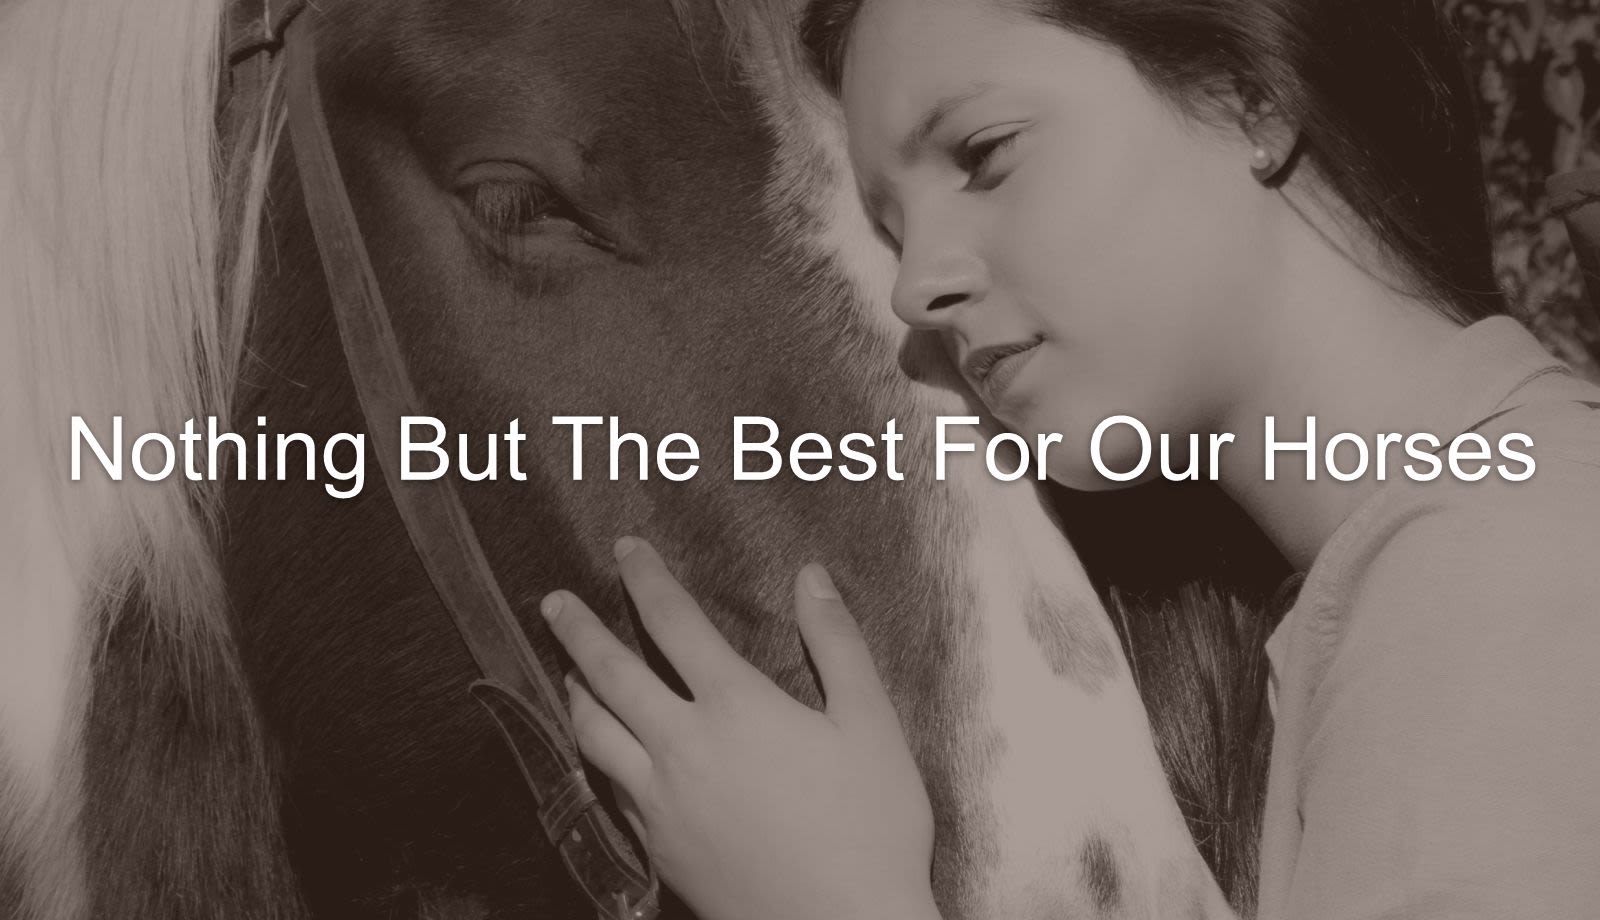 For the Love of Our Horses